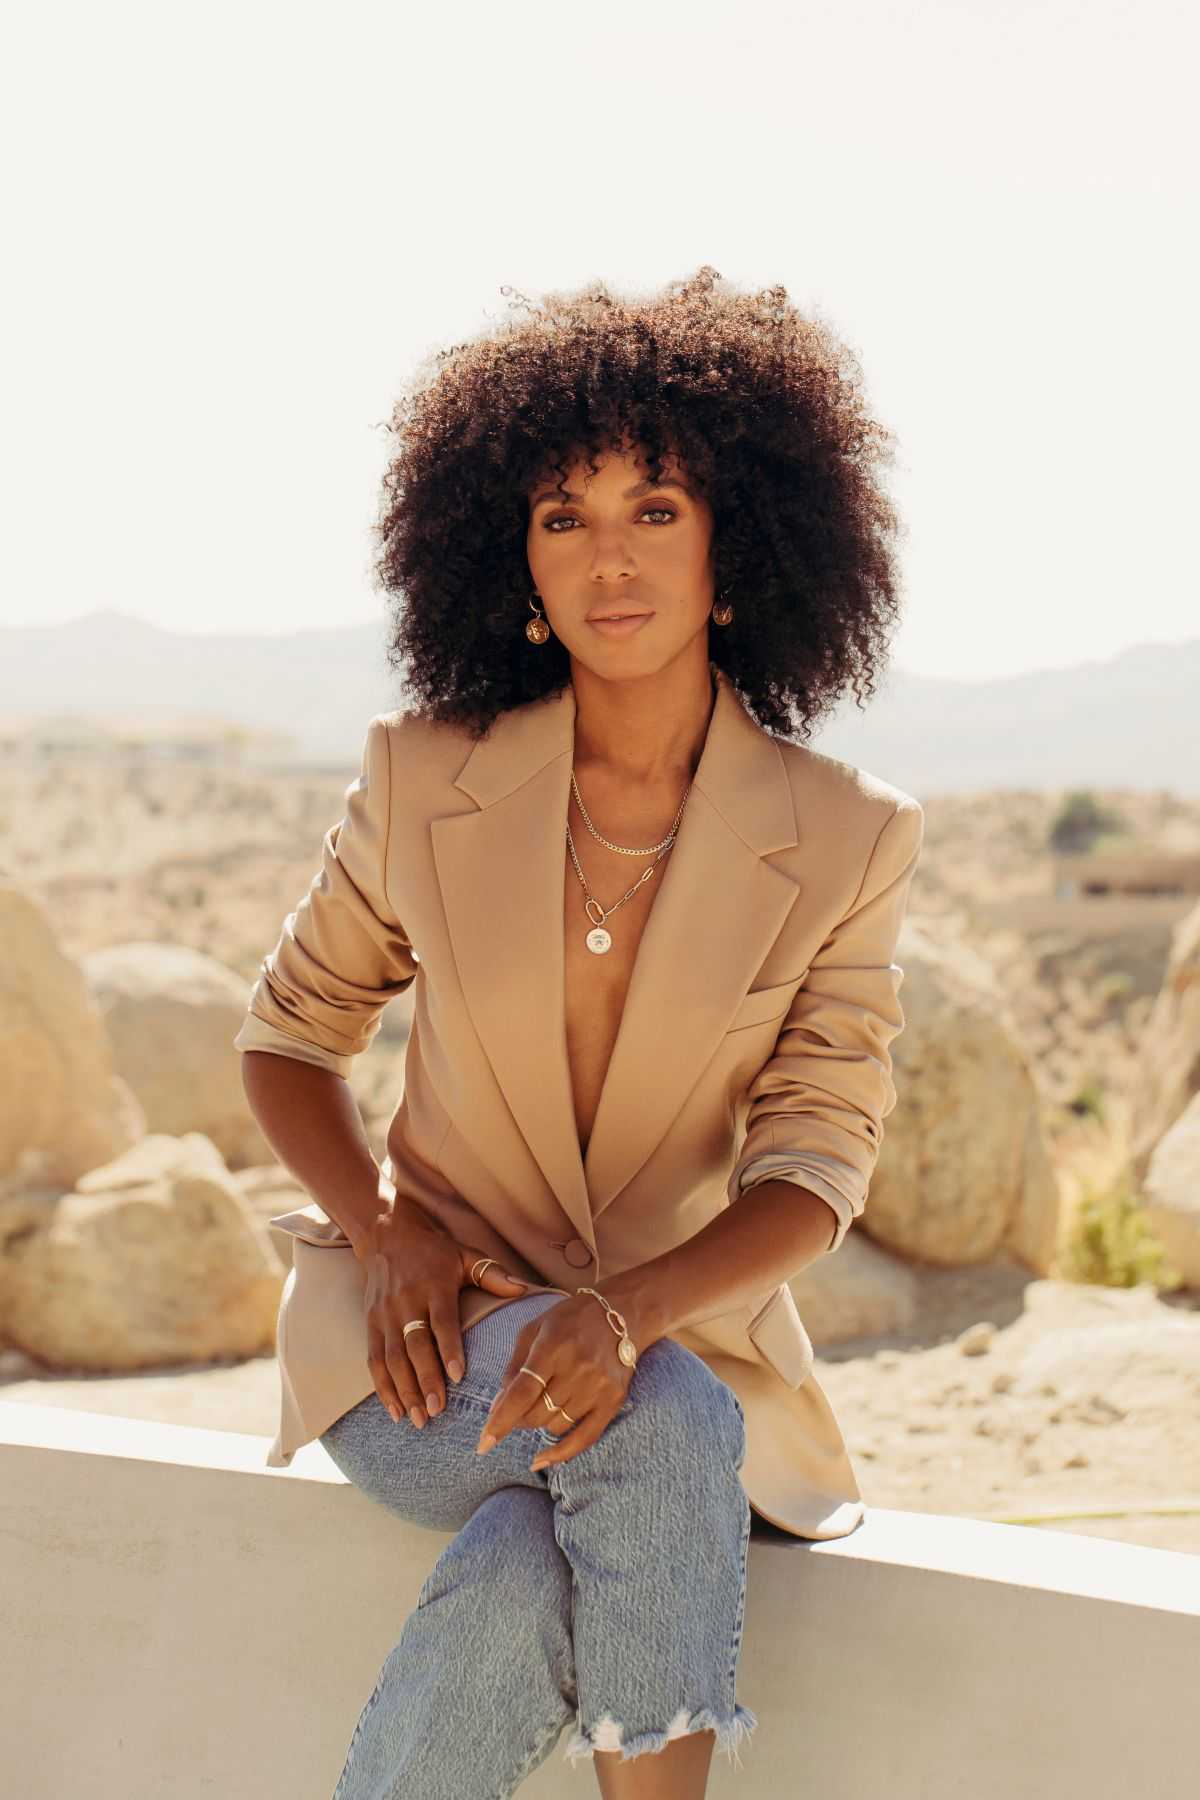 Kerry Washington x Aurate Lioness collection